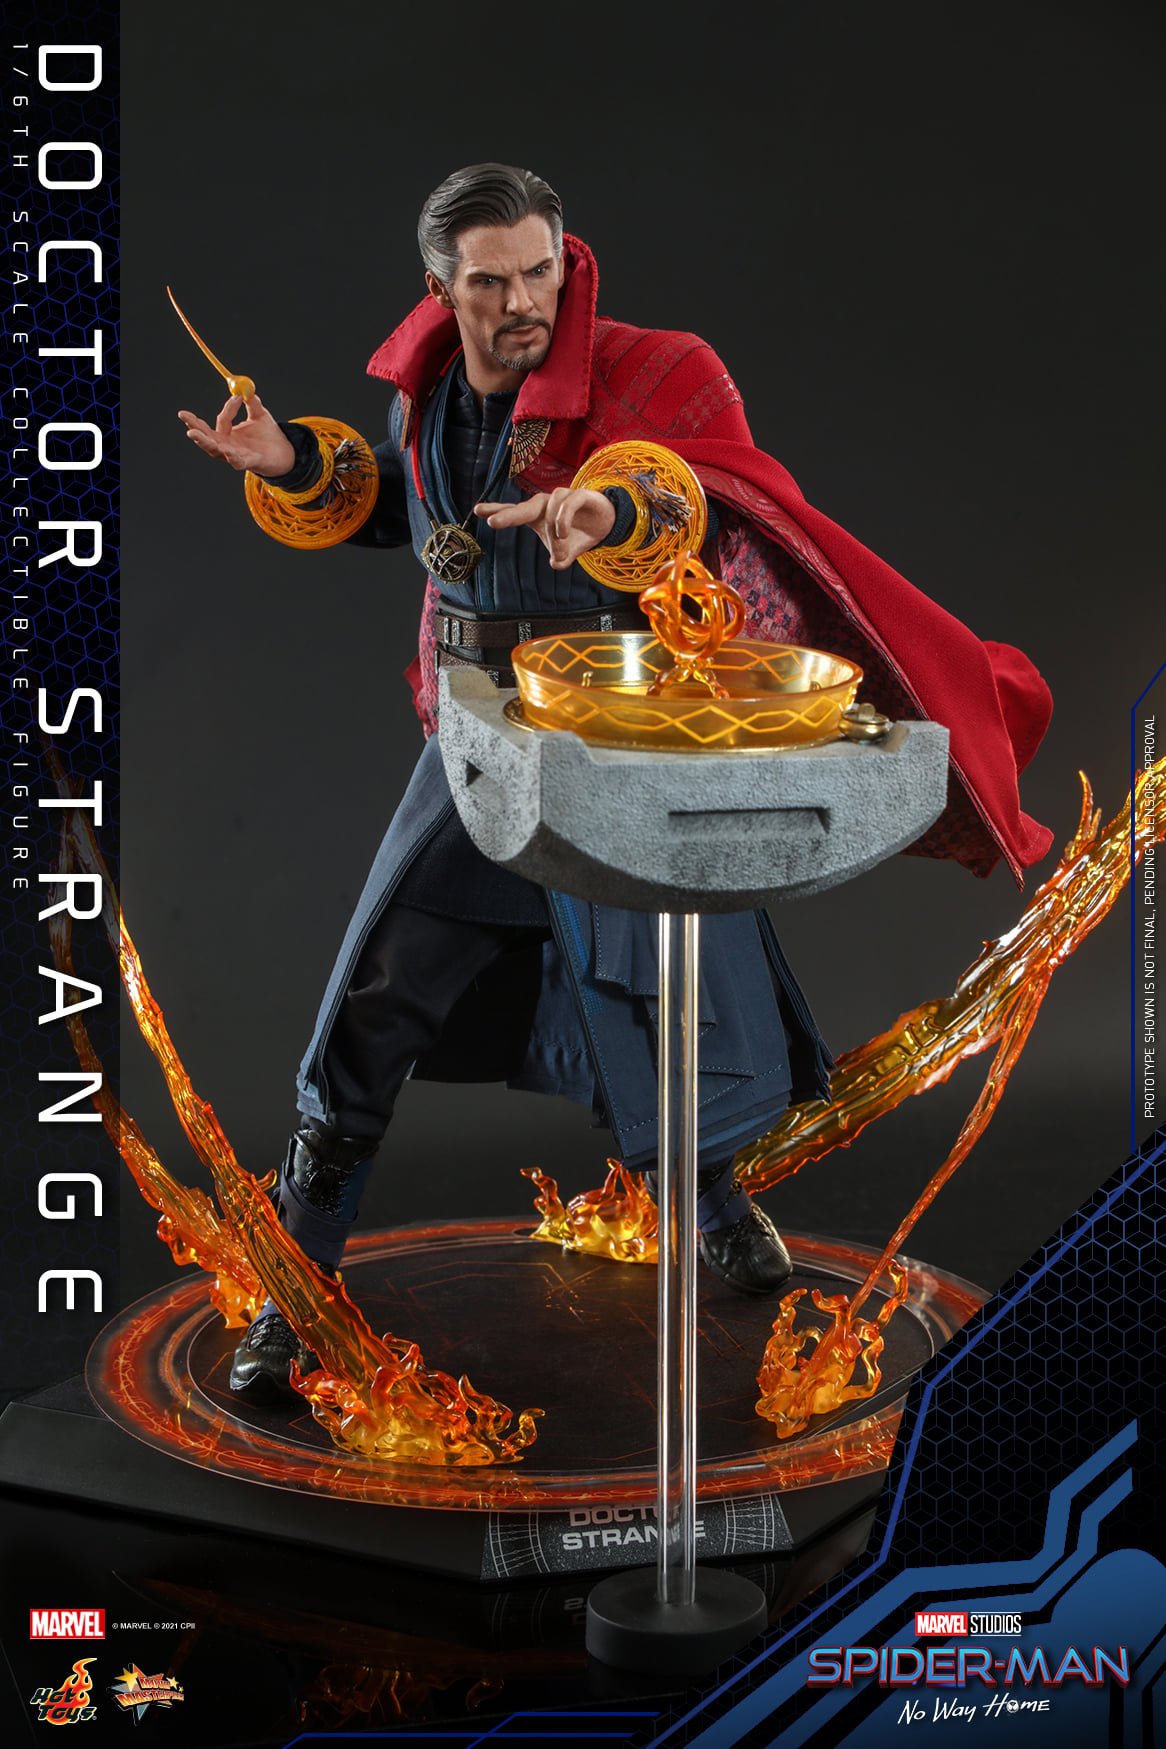 Hot Toys expands Movie Masterpieces line with Spider-Man's Doctor